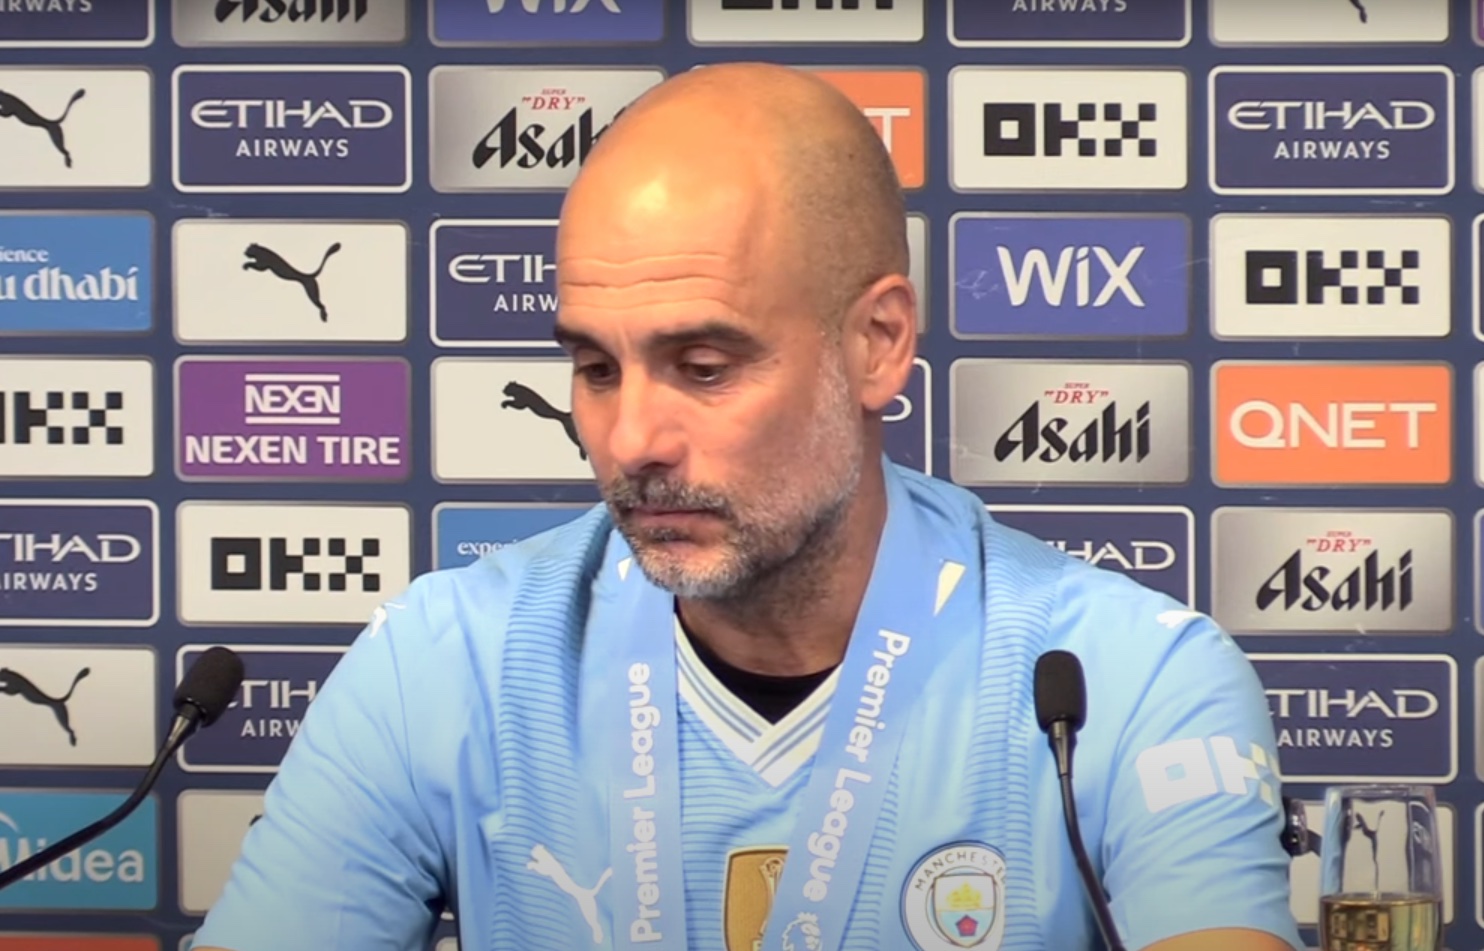 “I will miss him a lot:” Pep Guardiola close to tears as he reacts to praise from Jurgen Klopp